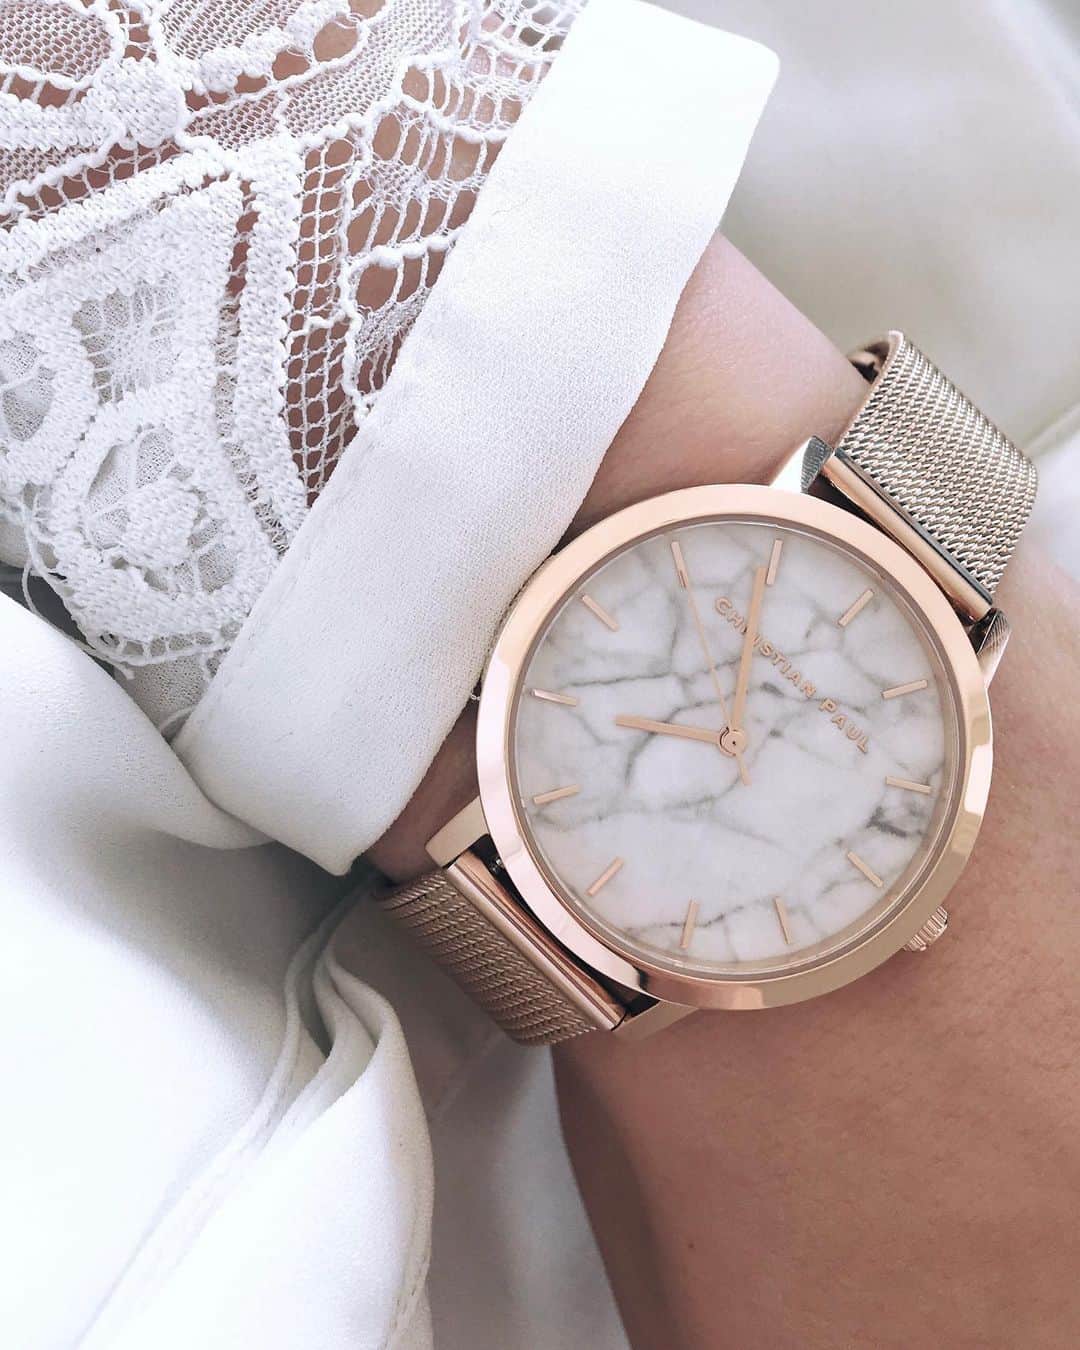 Christian Paulのインスタグラム：「Elevate your style with the timeless elegance of the Christian Paul Marble Bondi Mesh watch.  Crafted with precision and attention to detail, this stunning timepiece is a fusion of sophistication and modern aesthetics. The mesmerizing marble dial serves as a reminder of the beauty found in nature, while the sleek mesh strap adds a touch of contemporary flair.  Embrace the art of punctuality with the reliable quartz movement that ensures accurate timekeeping, empowering you to seize every moment with confidence.  . . #ChristianPaulWatches #TimelessElegance #LuxuryTimepieces #ClassicStyle #ChristianPaulChronicles #FashionableWatches #WristCandy #TimelessBeauty #TimeIsPrecious #ChristianPaulTimepieces #ElegantAccessories #WatchEnthusiast #FashionForwardWatches #SophisticatedStyle #ChristianPaulWatchCollection #TimelessDesigns #StylishWatches #ChristianPaulChronograph #LuxuryWatches #TimelessFashion #WristGameStrong」